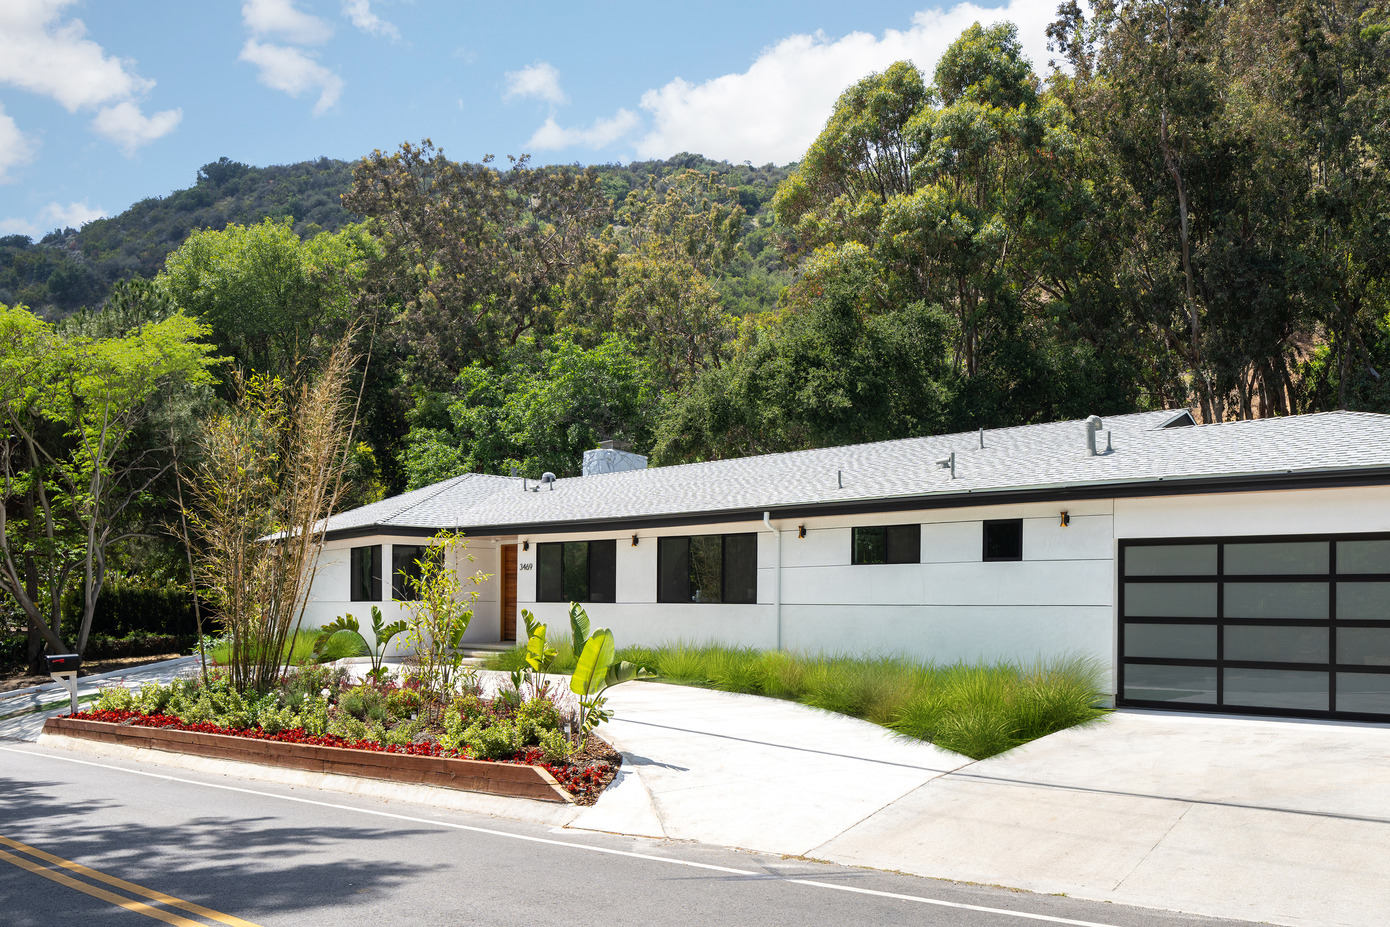 Mandeville Canyon Residence: 1950s Charm Reimagined